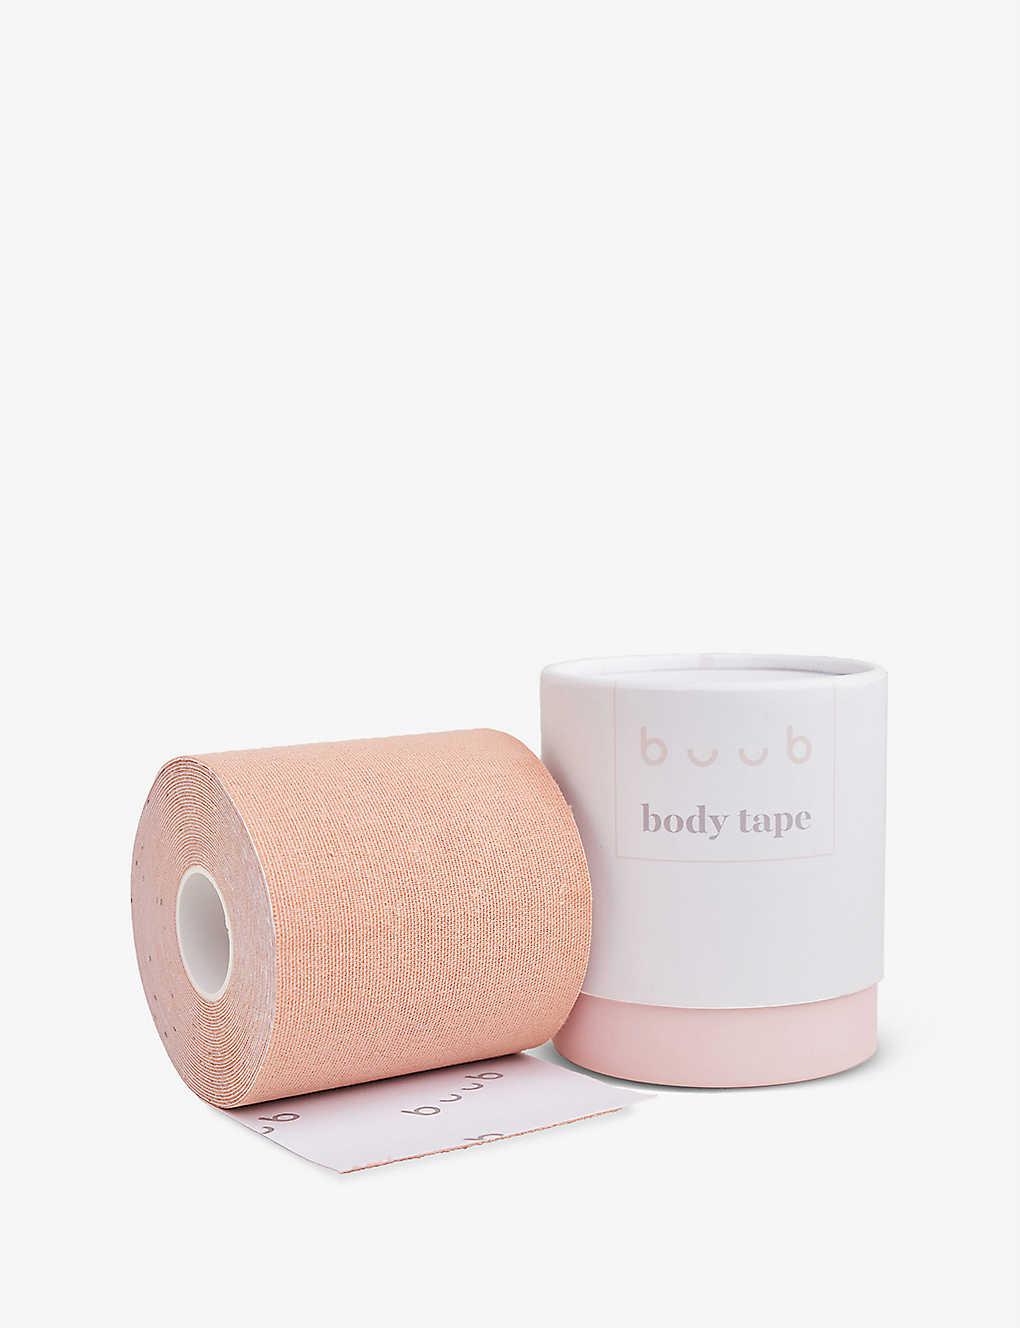 Buub Maxi D+ Cup Adhesive Body Tape In Nude